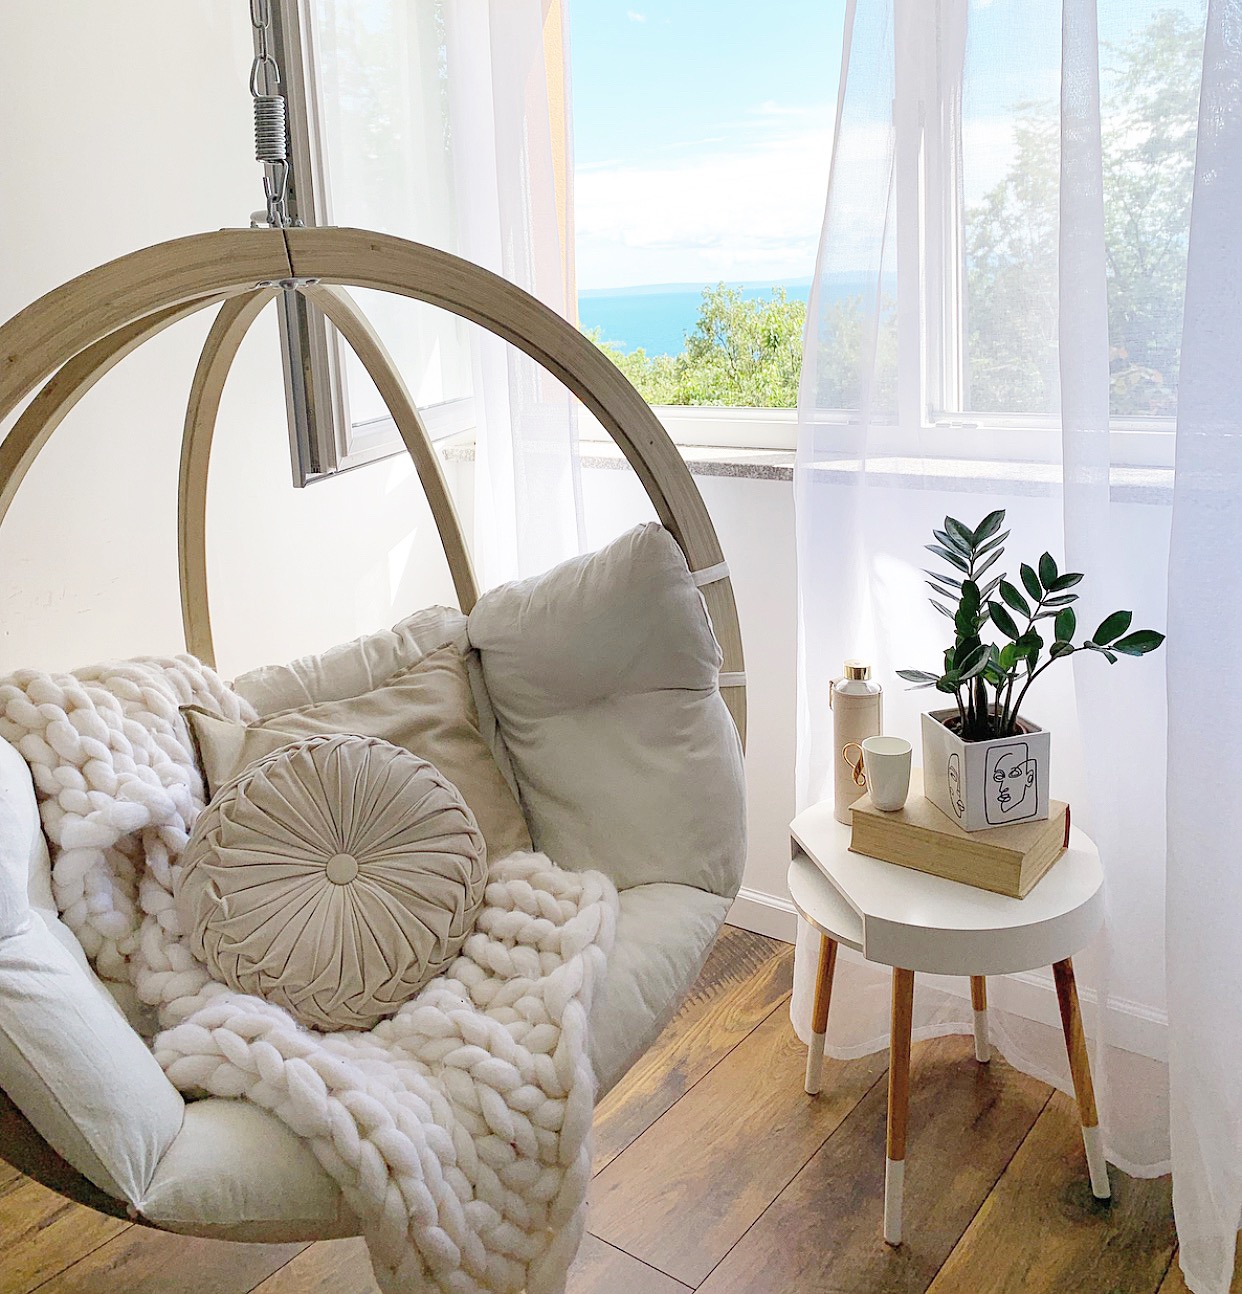 wooden-swing-hanging-in-the-corner-of-living-room-view-on-adriatic-sea-Valentina